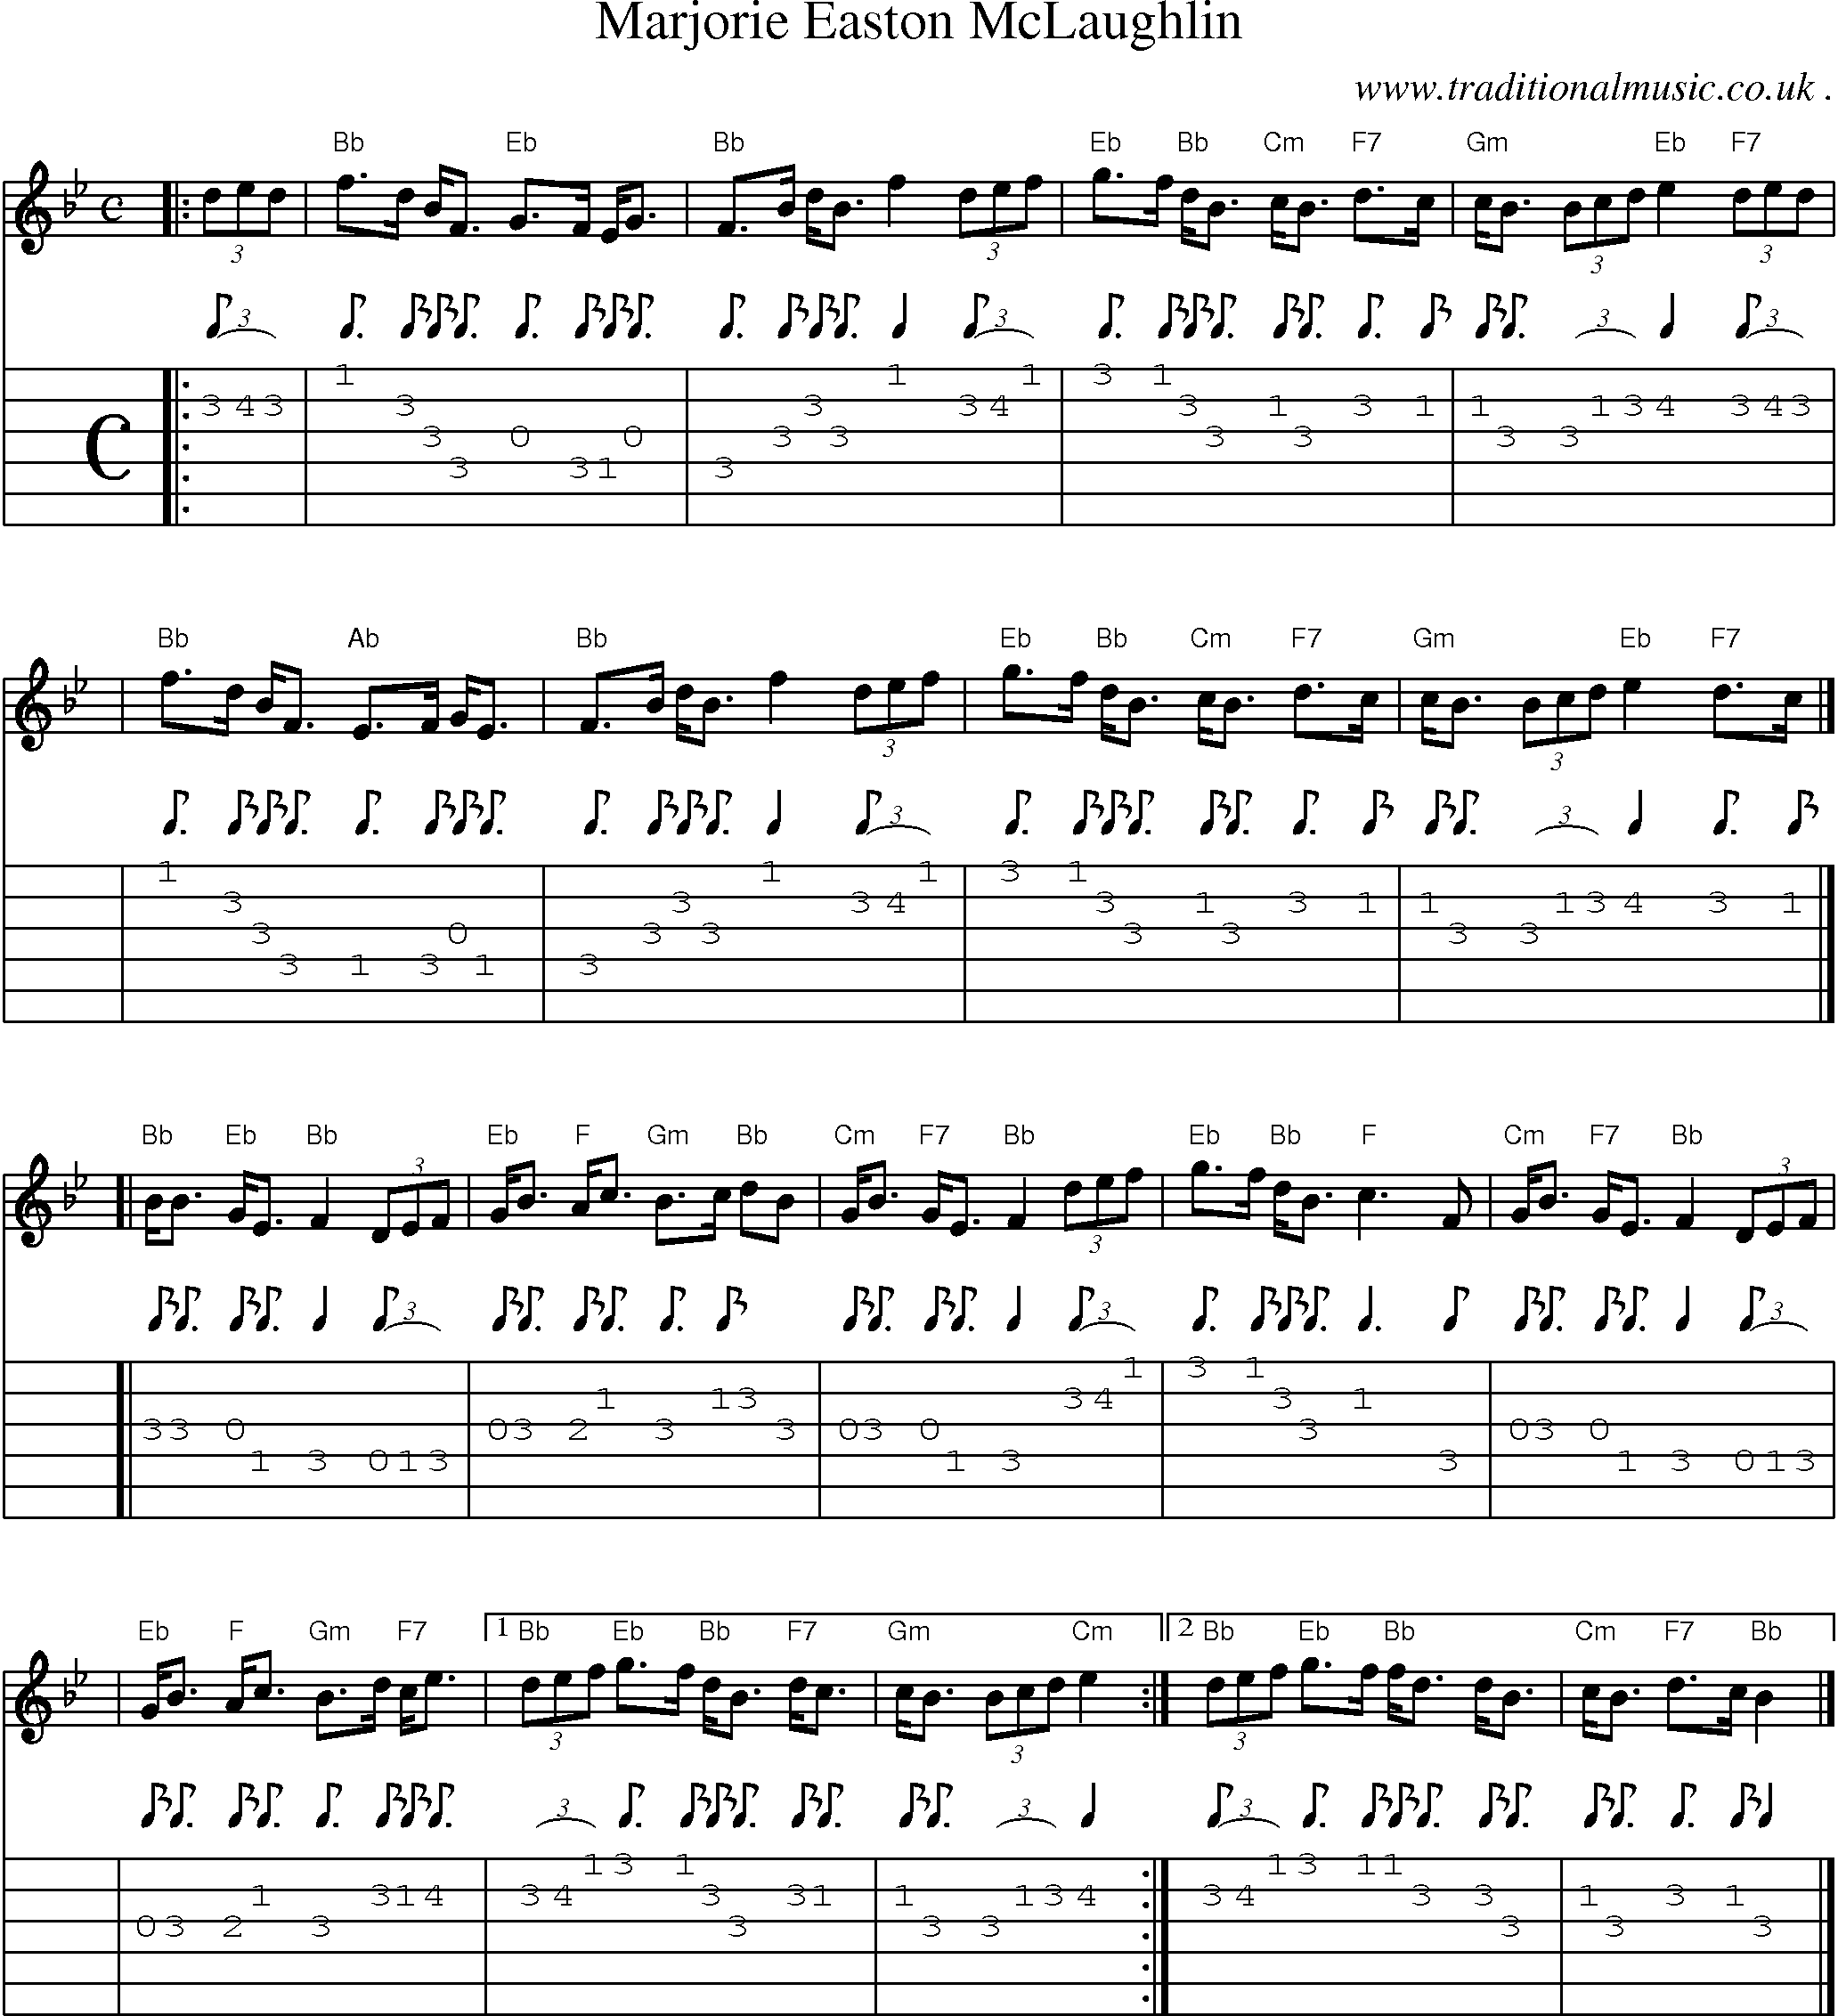 Sheet-music  score, Chords and Guitar Tabs for Marjorie Easton Mclaughlin